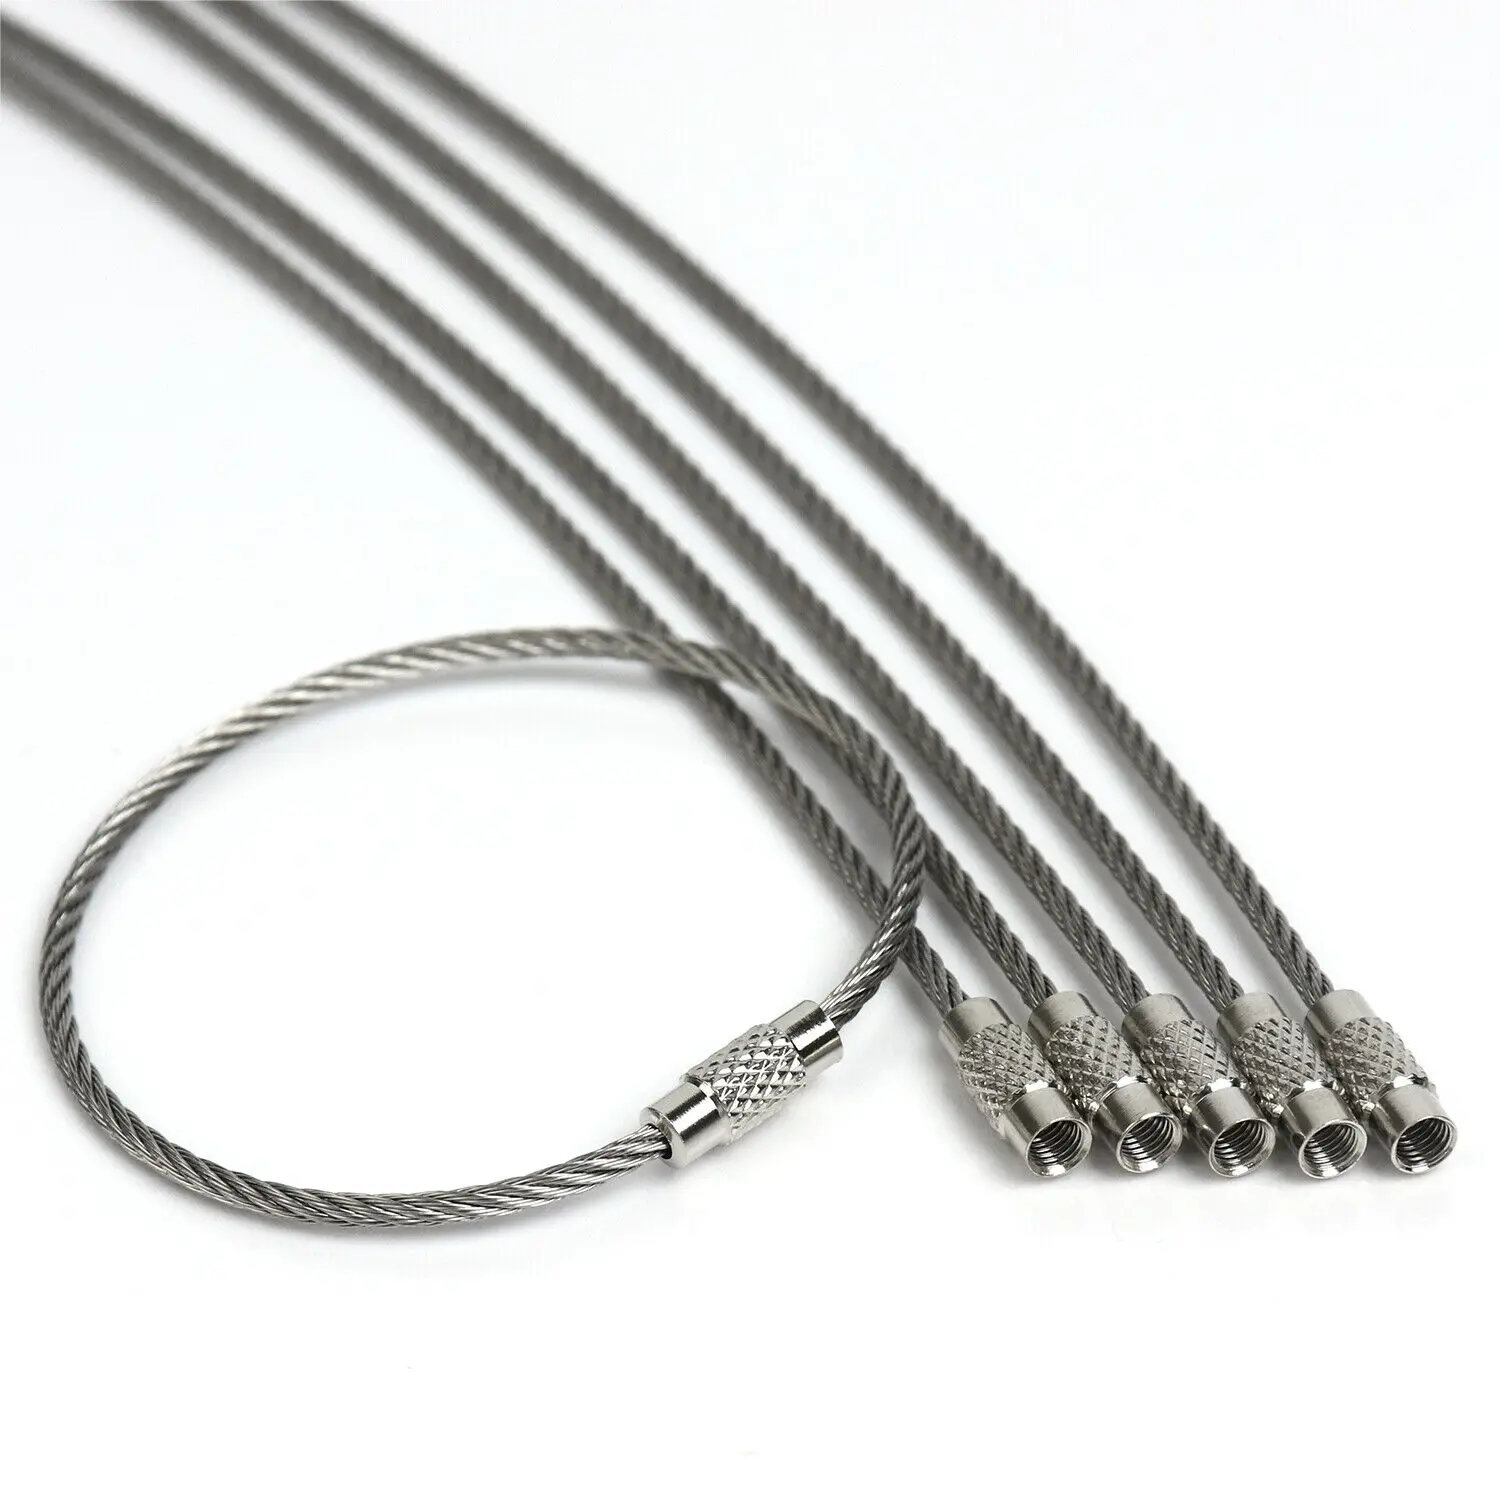 2mm Stainless Steel Wire Keychain 6.3 Aircraft Cable Key Ring Luggage Loops